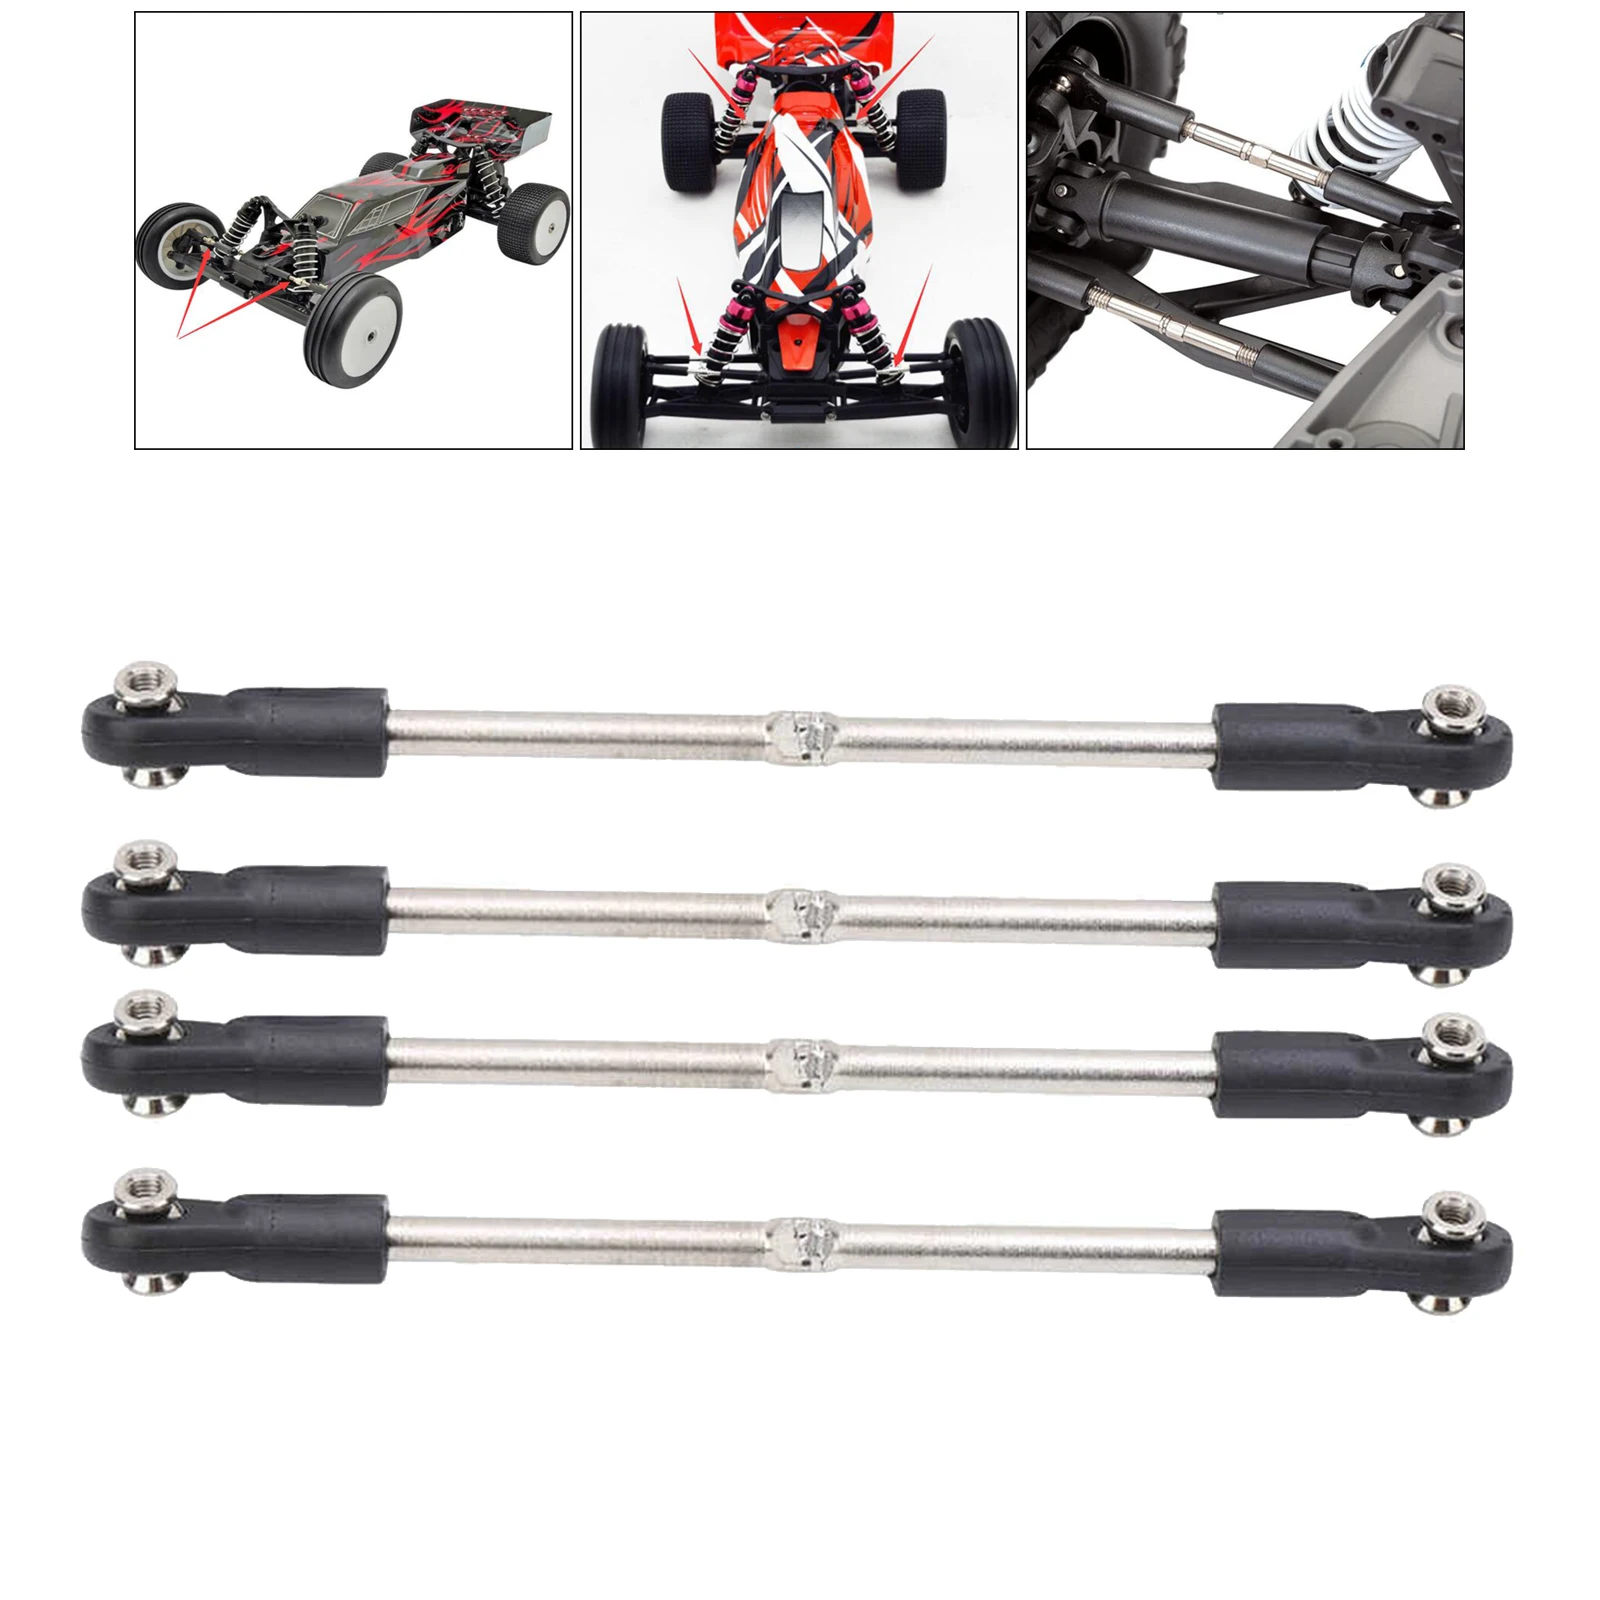 4pcs/set Metal RC Car Steering Pull Rod Servo Link for ZD Hobao 1:8 Car Buggy Model Vehicles Replacement Parts